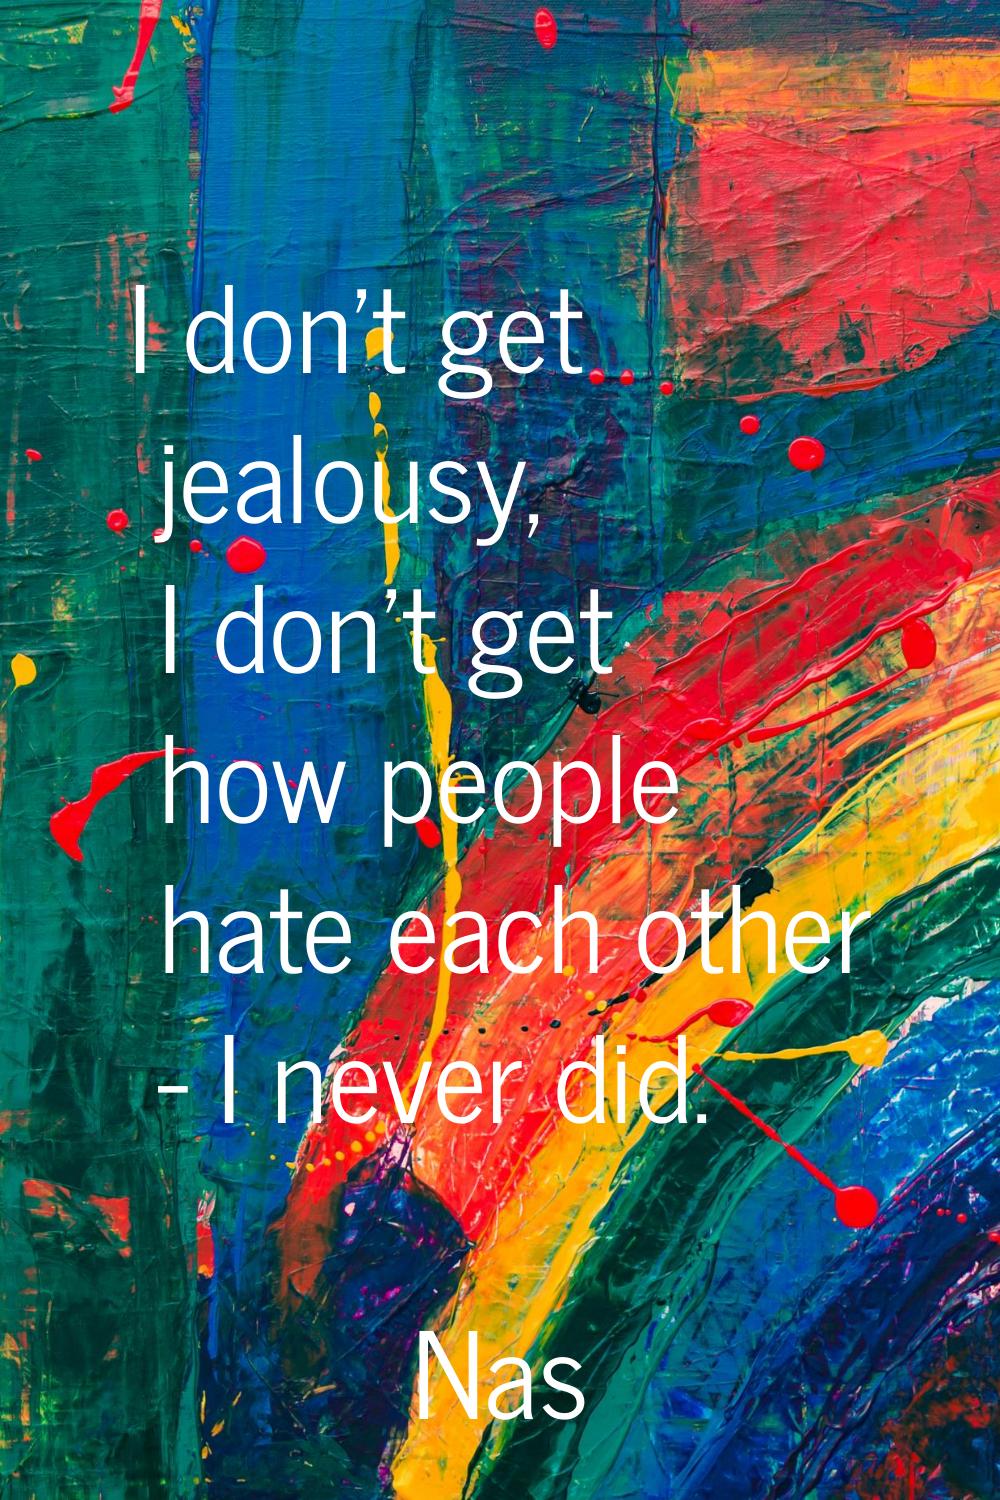 I don't get jealousy, I don't get how people hate each other - I never did.